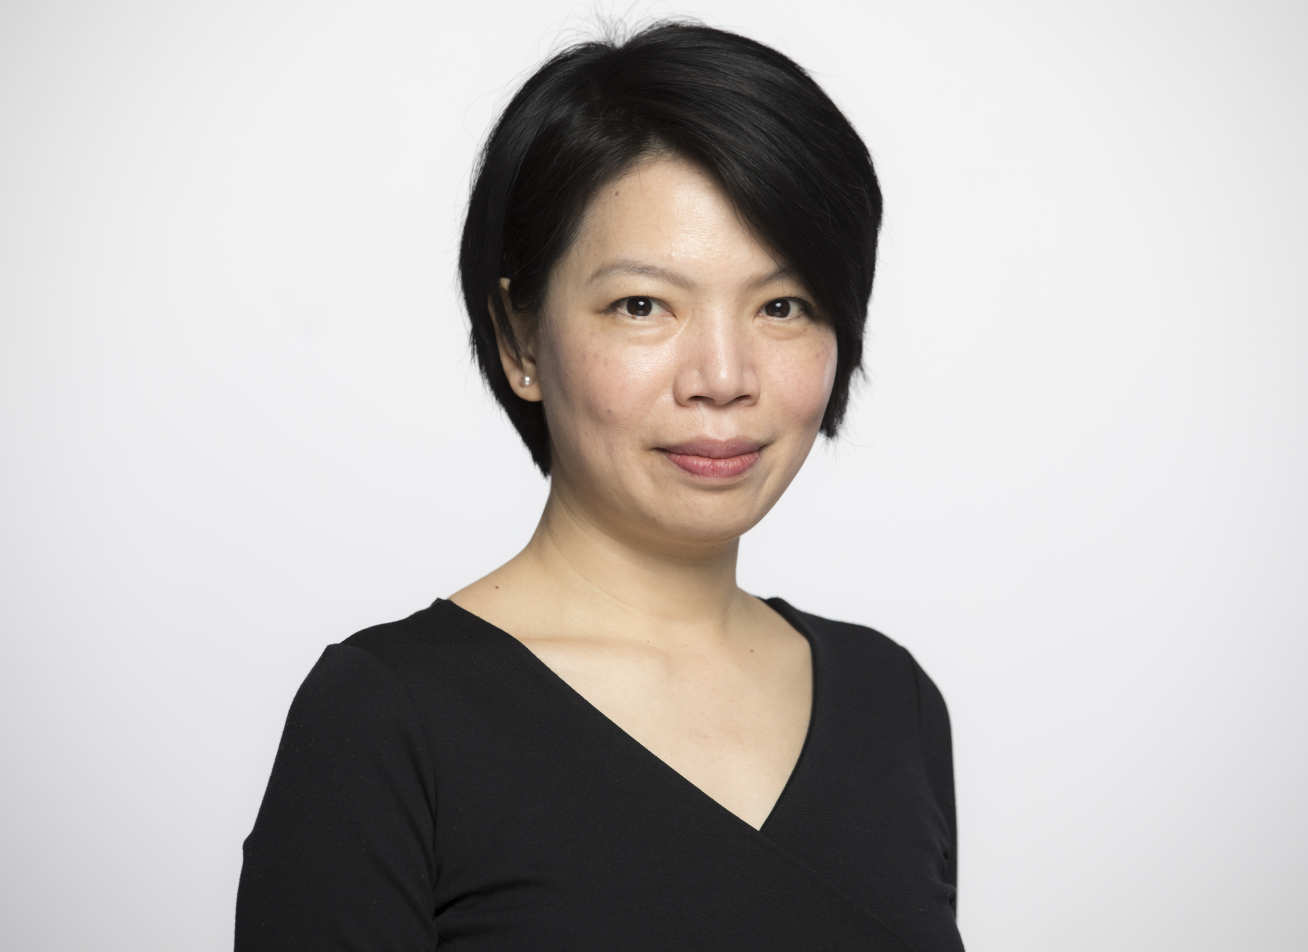 Dr Ying-Ying Hsieh